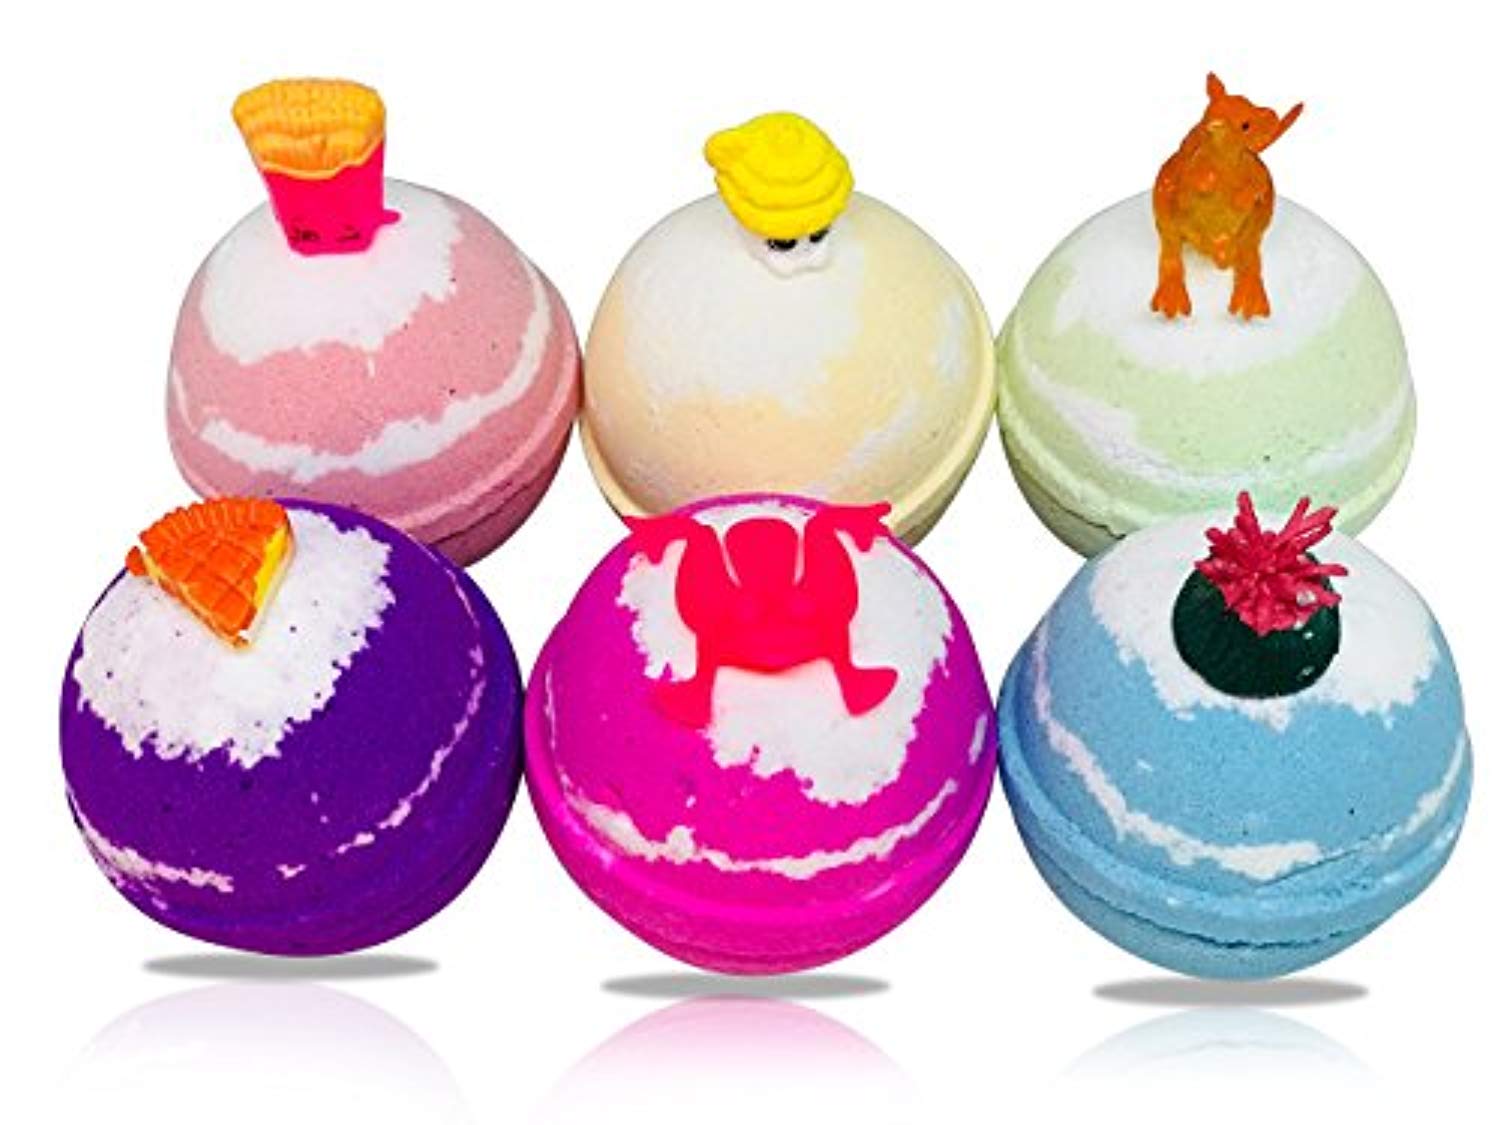 TOY BATH BOMB Set for KIDS - Gender Neutral - 5.5 Ounce BUBBLE BOMBS